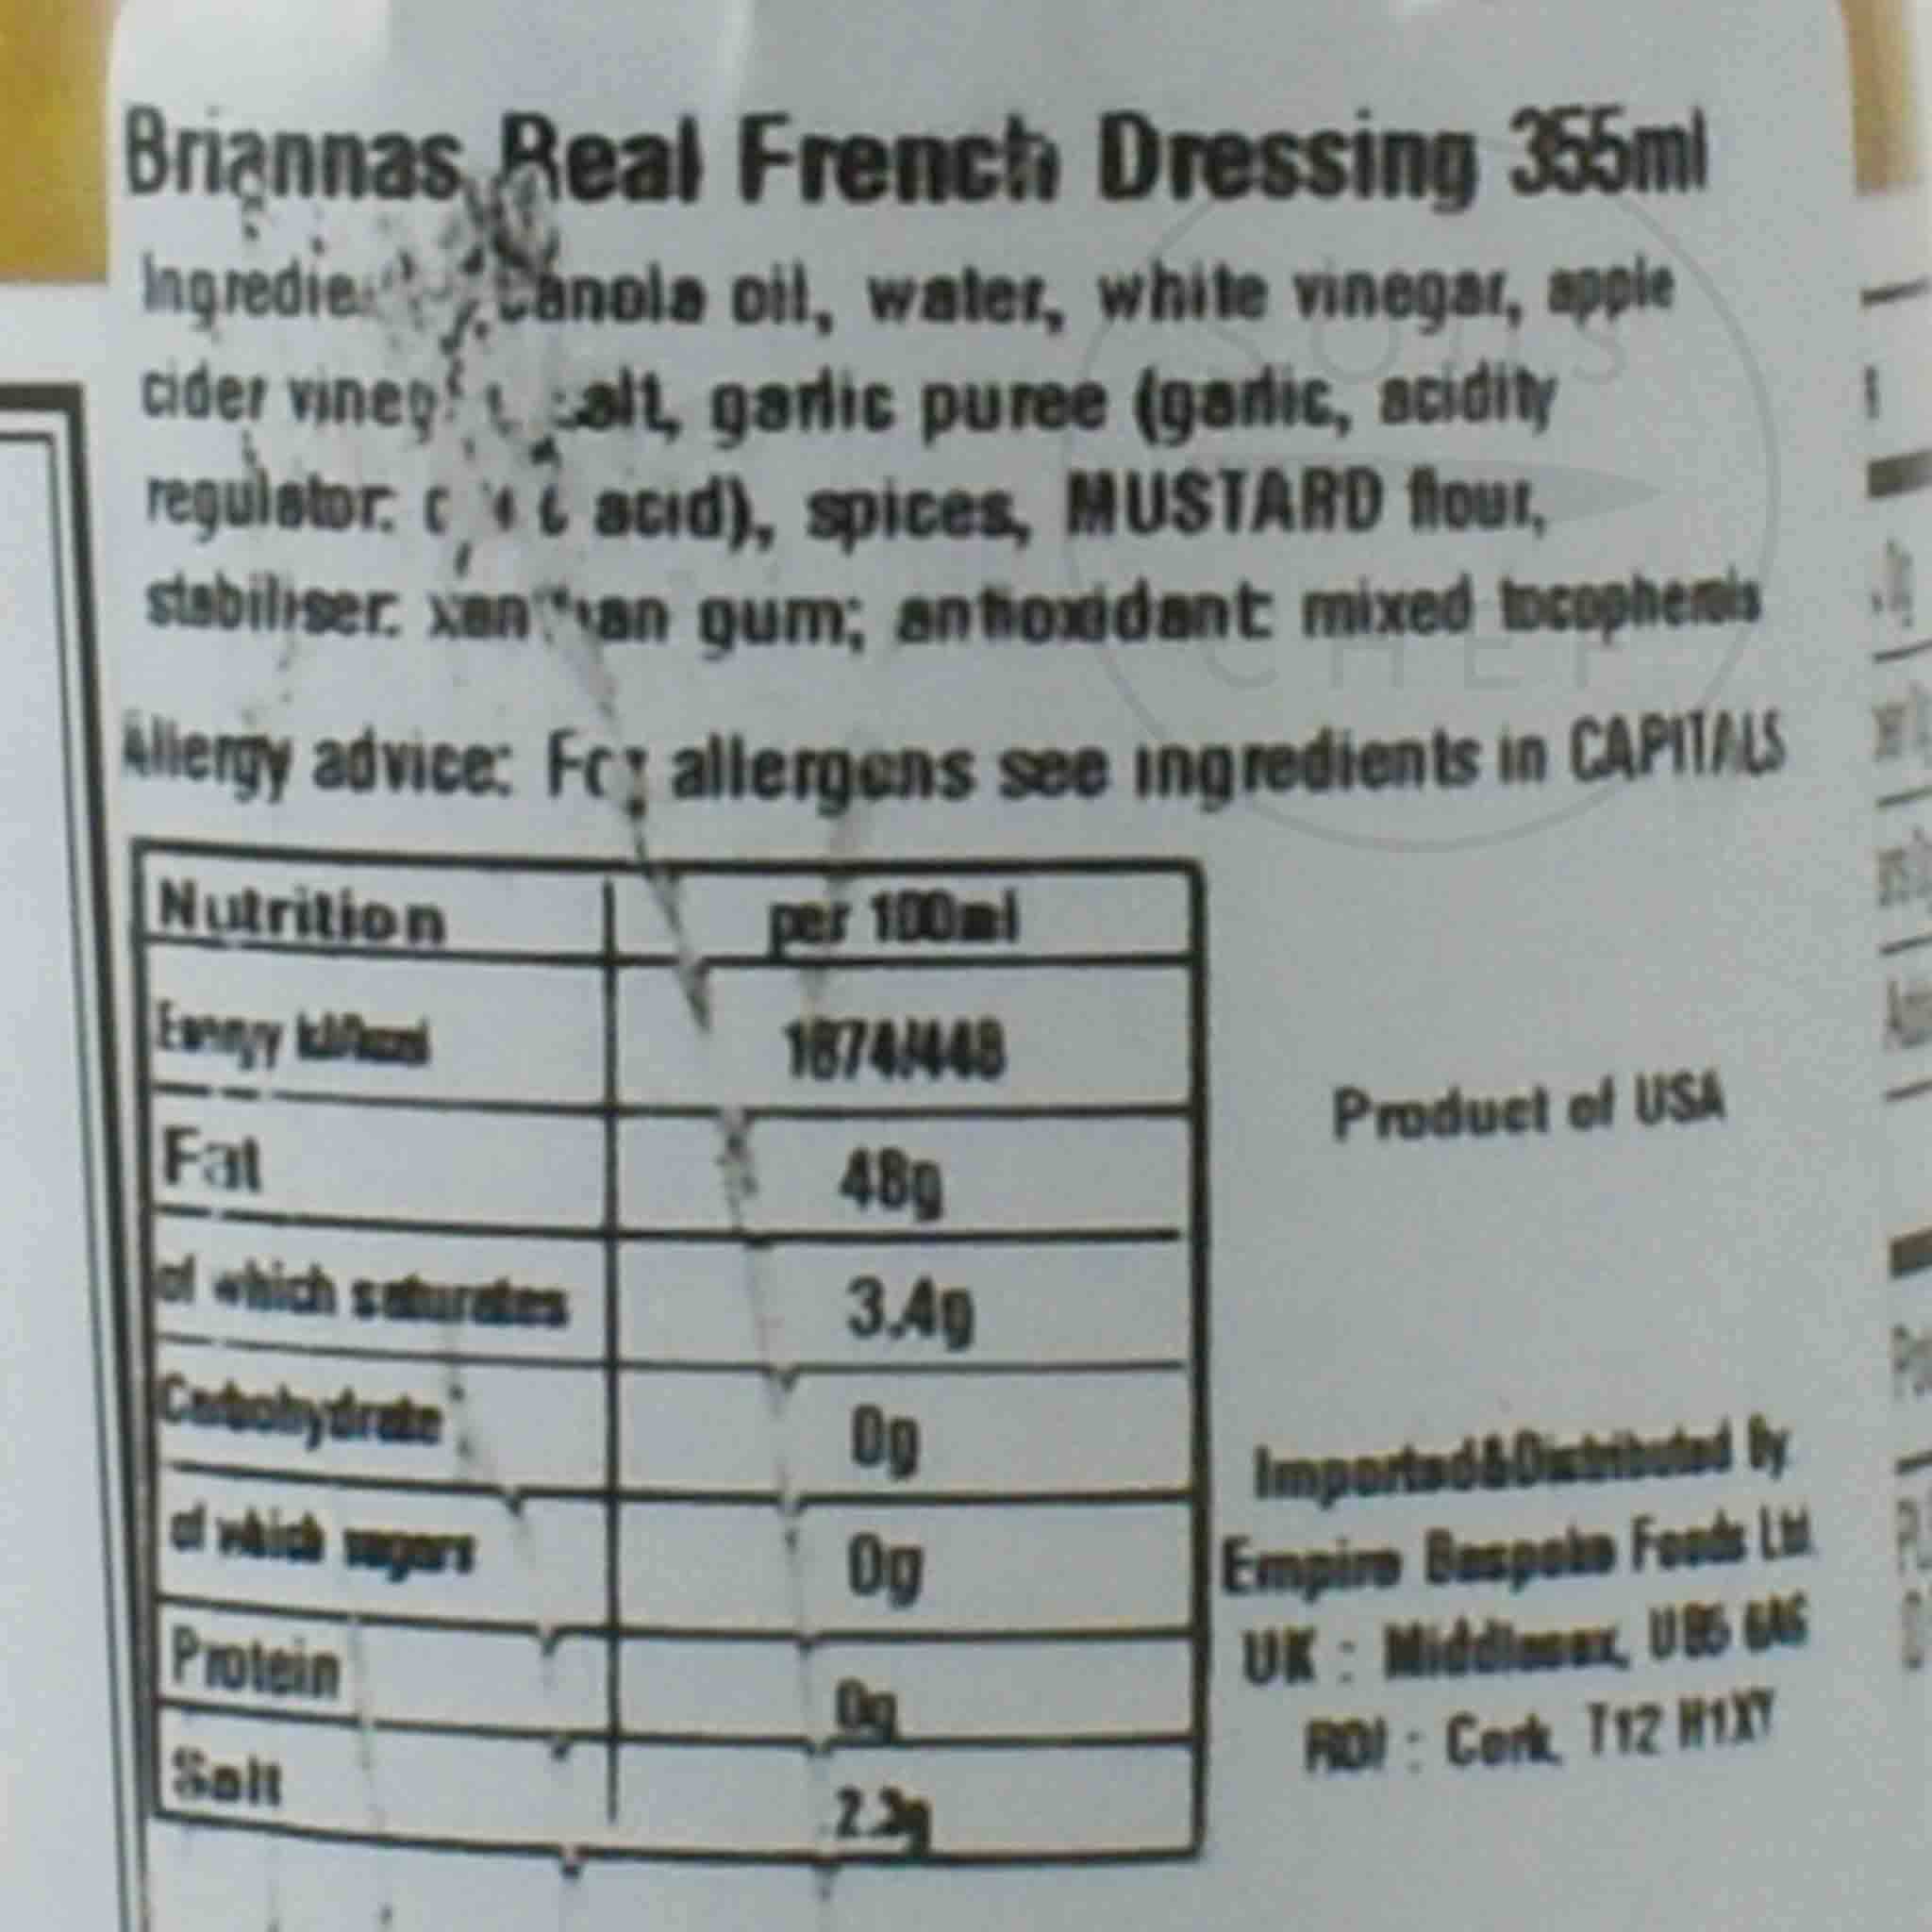 Briannas Real French Dressing 355ml